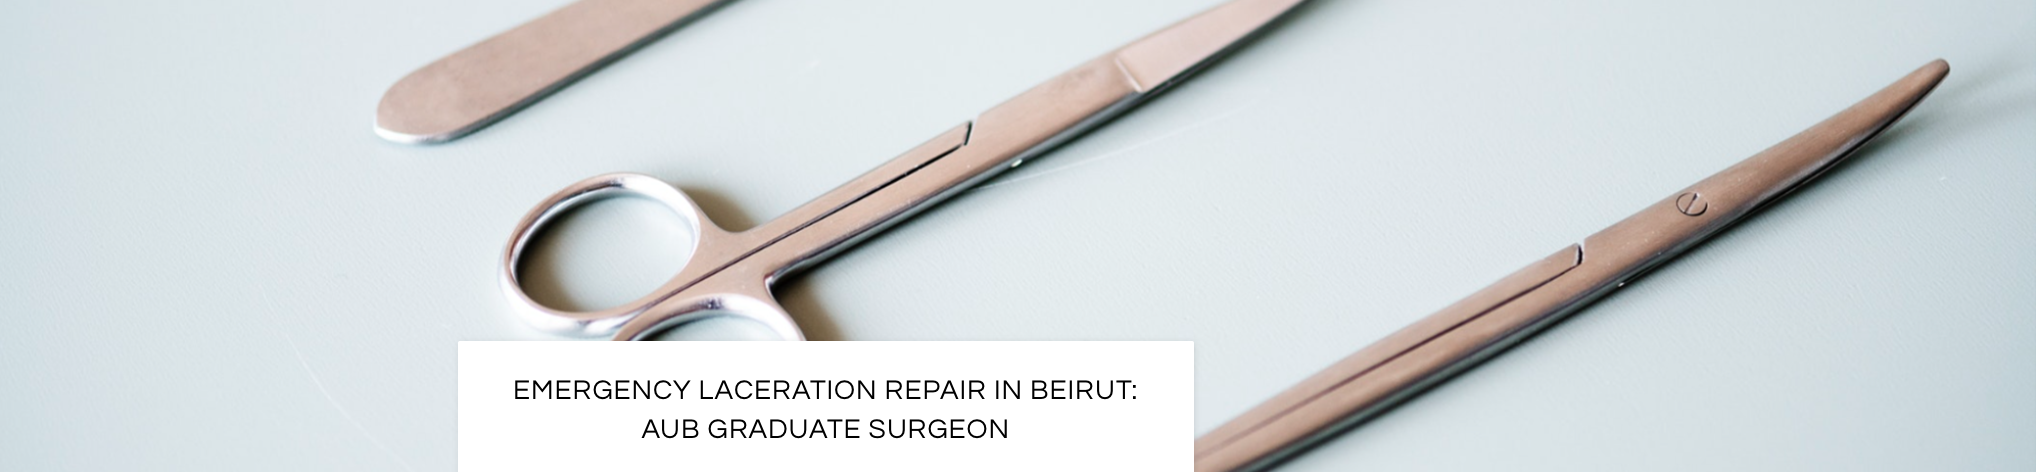 Emergency care for bruises, lacerations, cuts, scrapes, burns in Beirut with AUB Plastic Surgeon